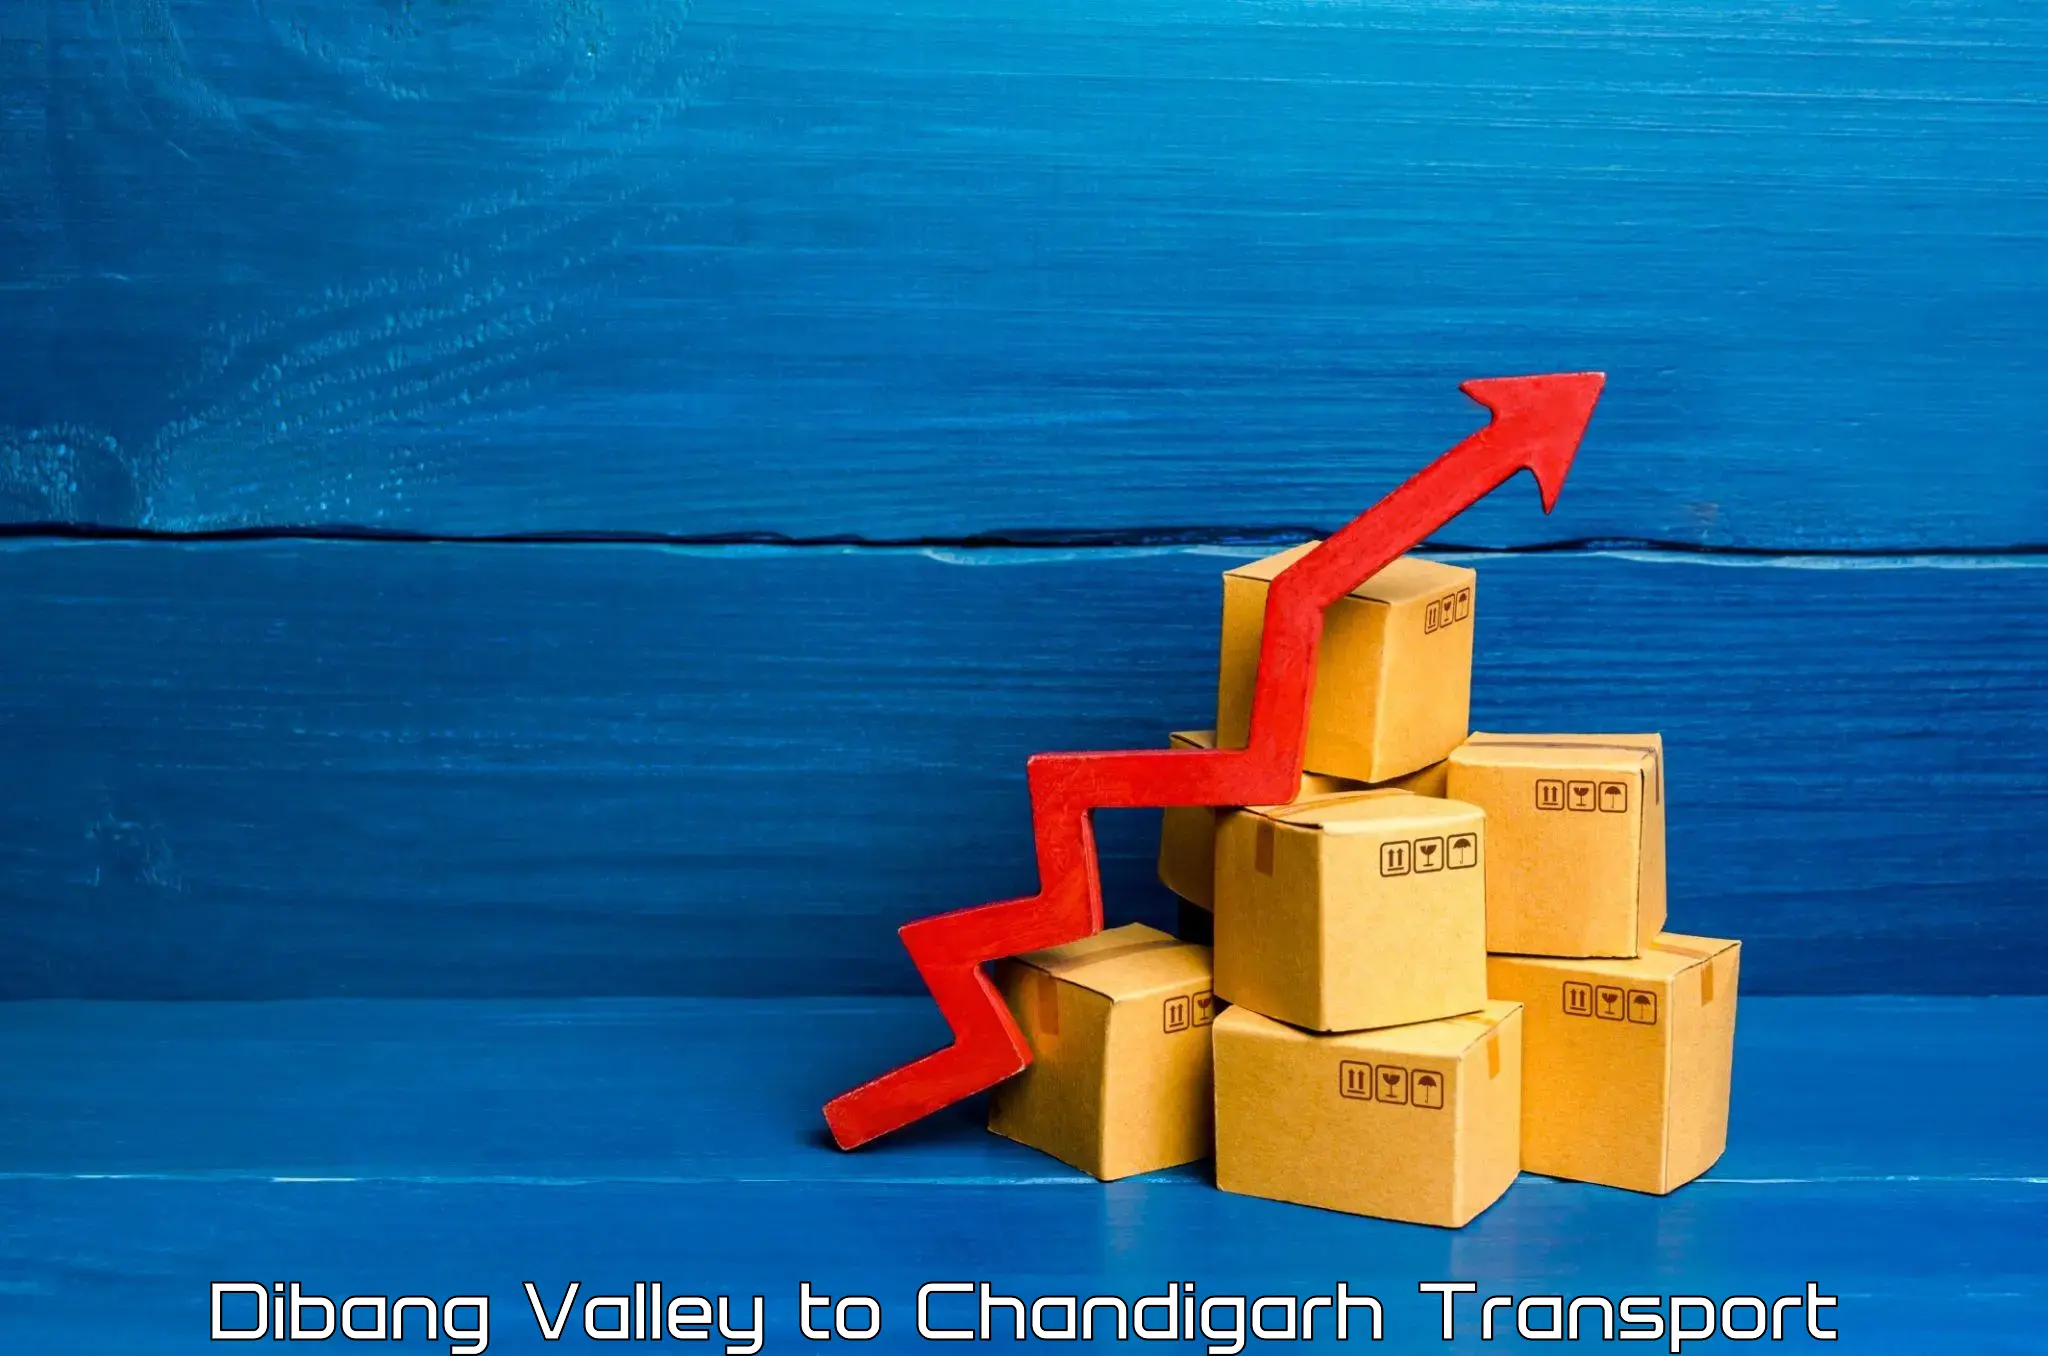 Truck transport companies in India Dibang Valley to Chandigarh